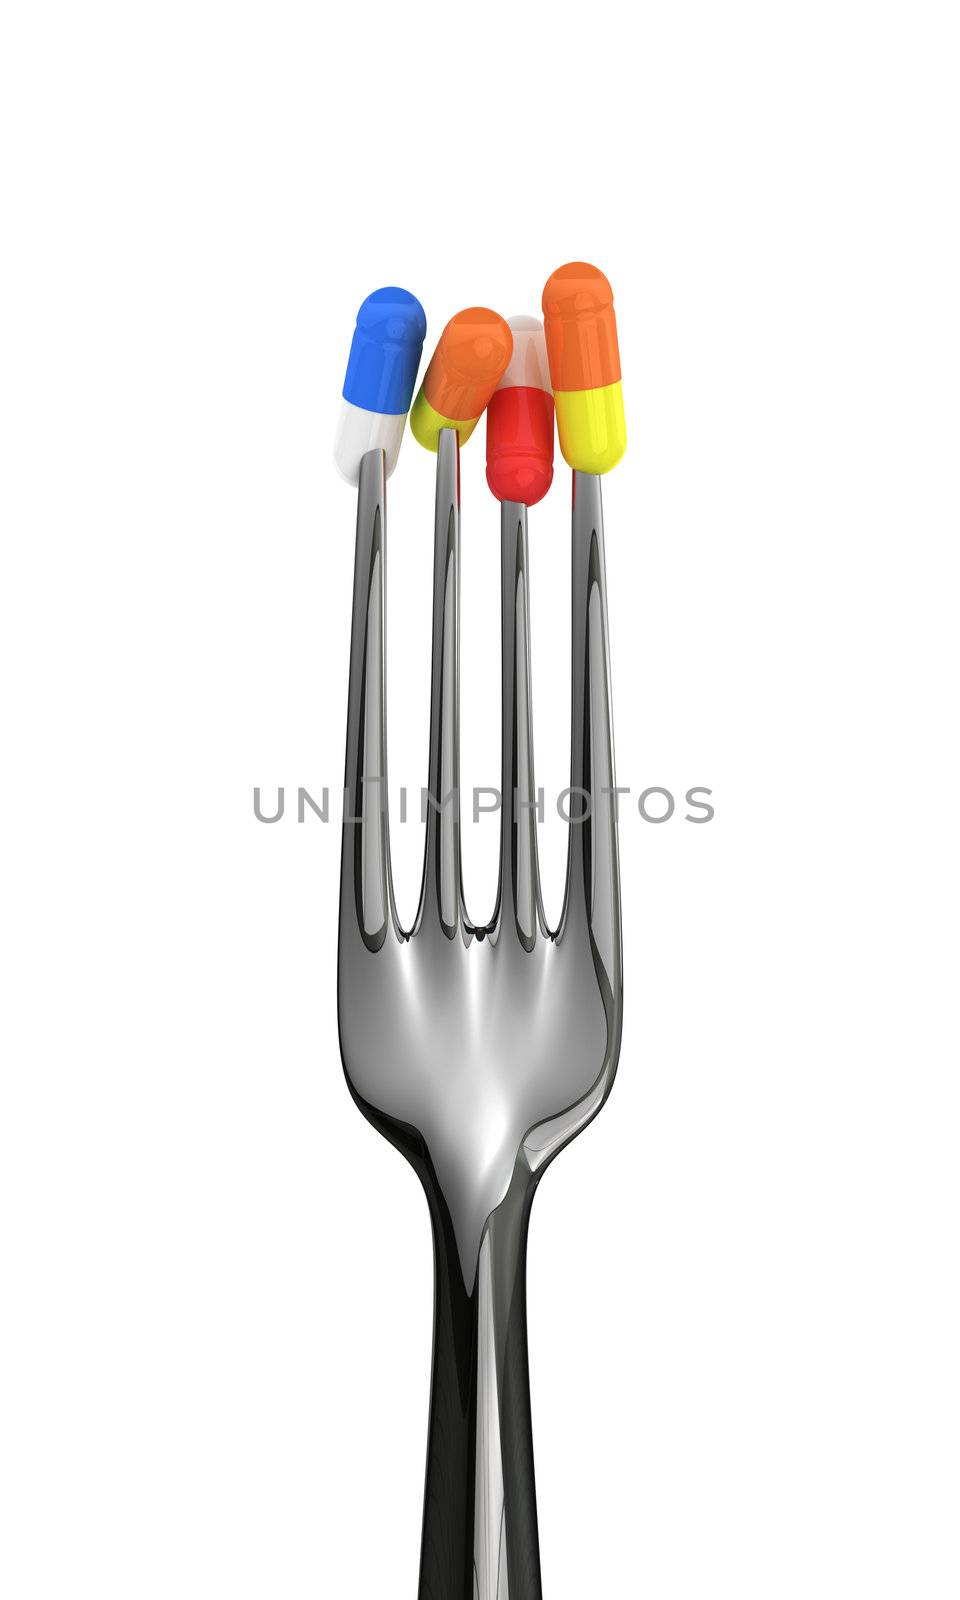 Silver fork with pills isolated on the white background